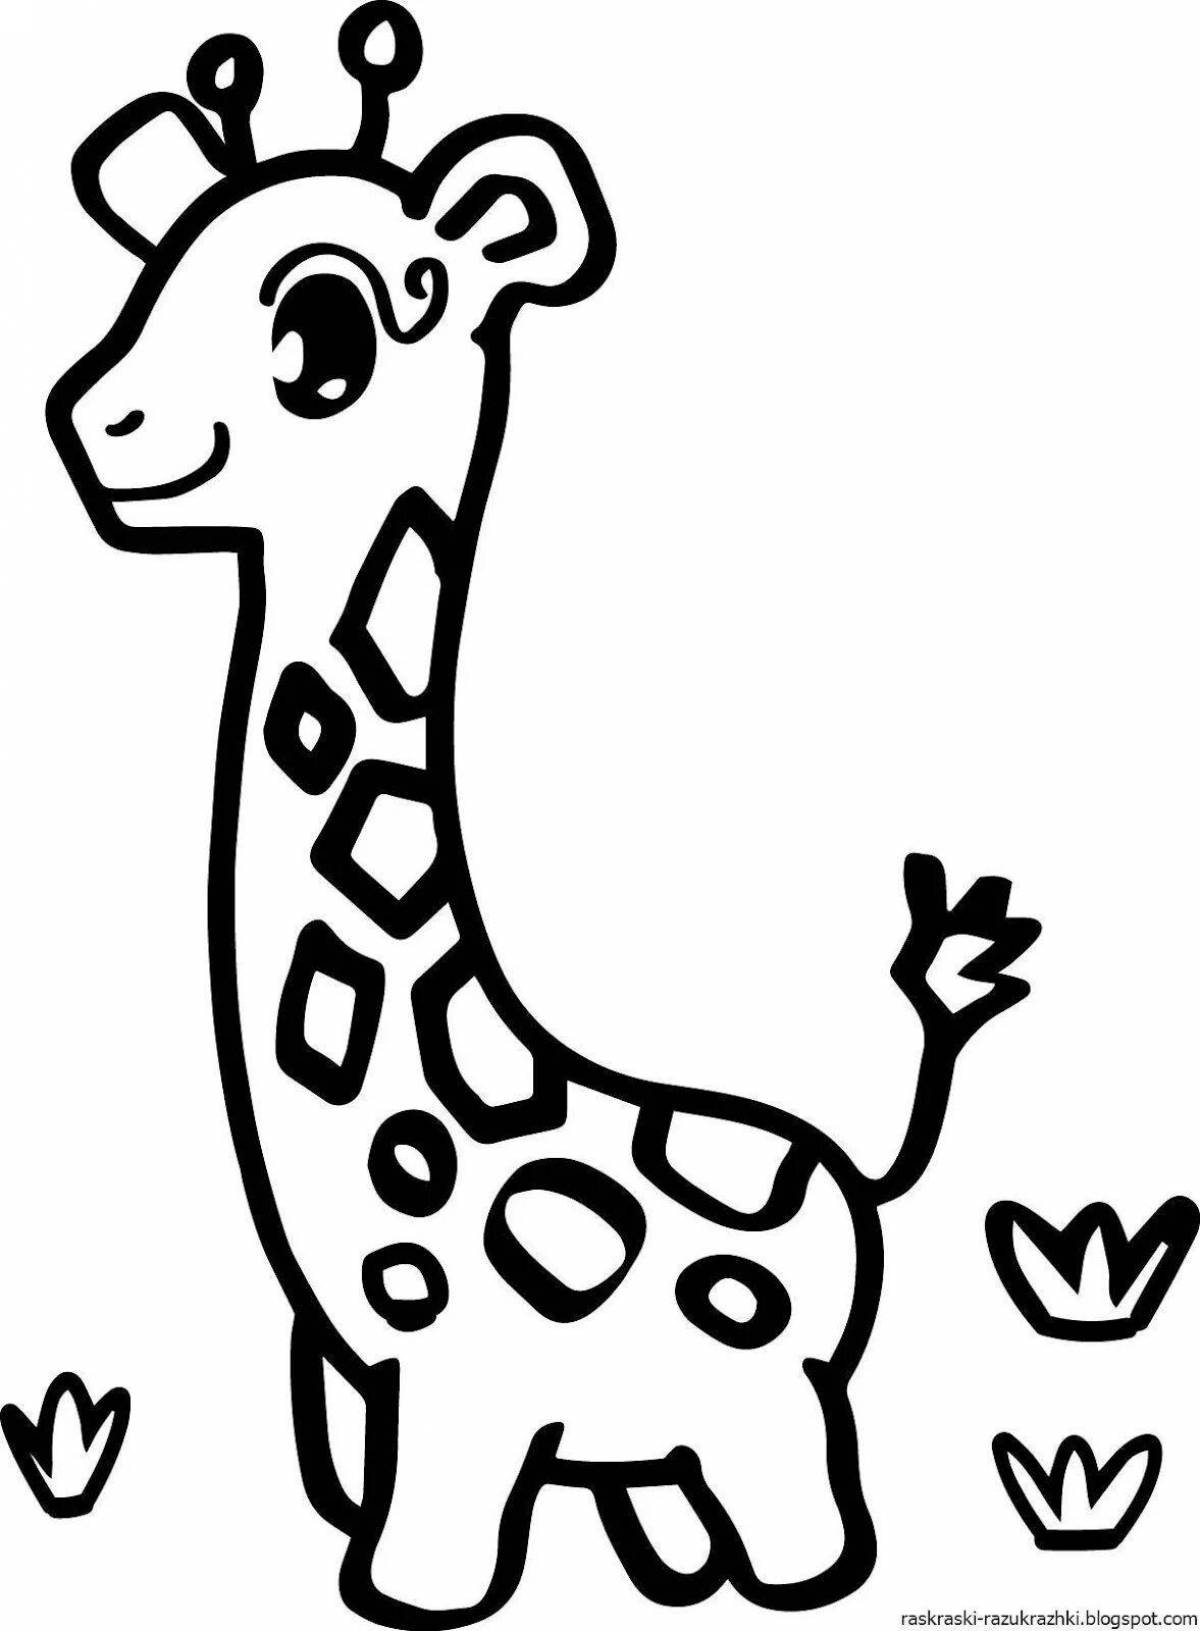 Bright coloring giraffe for the little ones